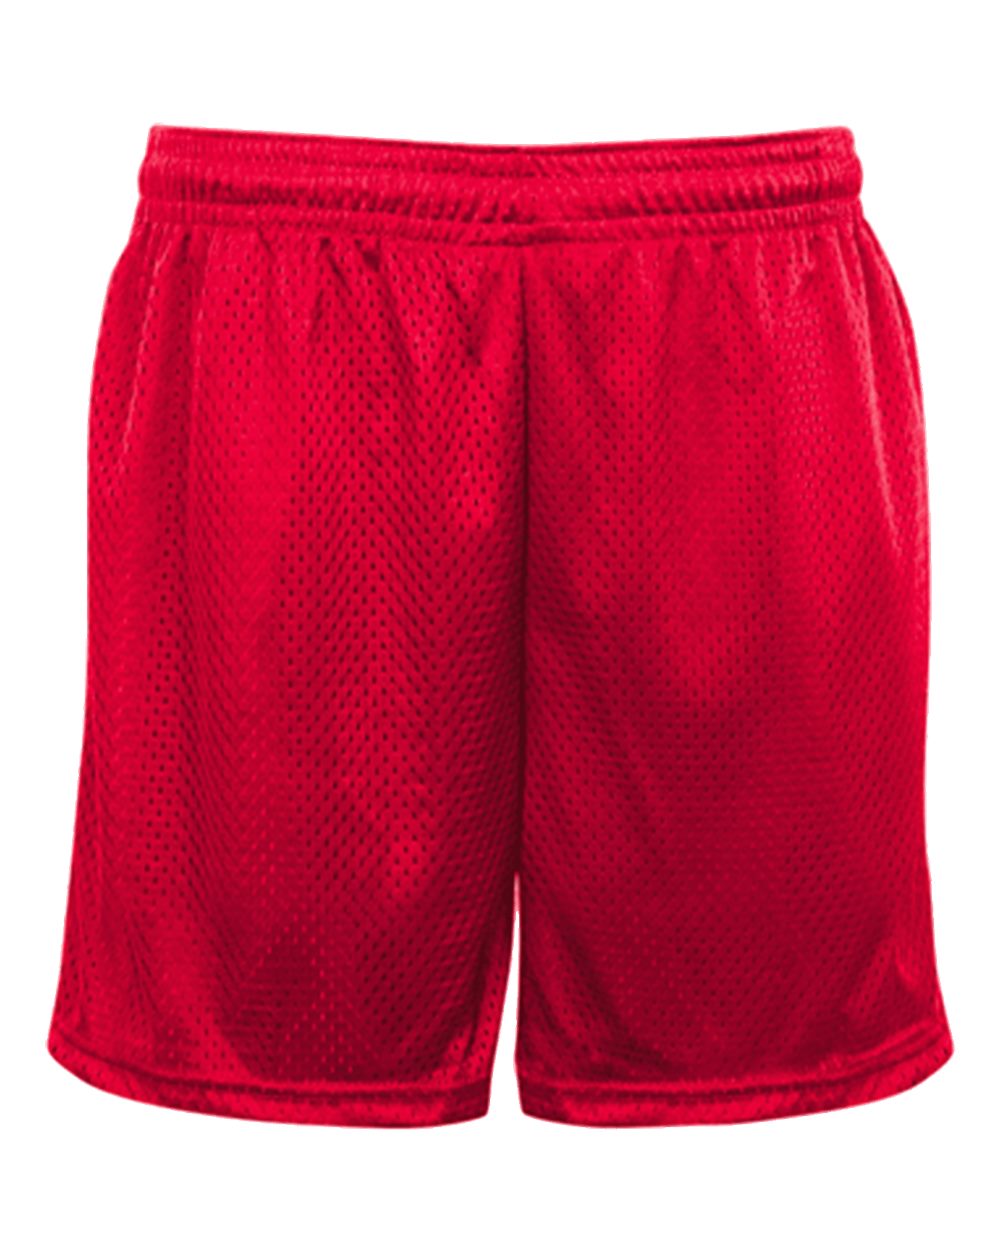 Badger Sport 2225 - Youth Tricot 4" Mesh Shorts